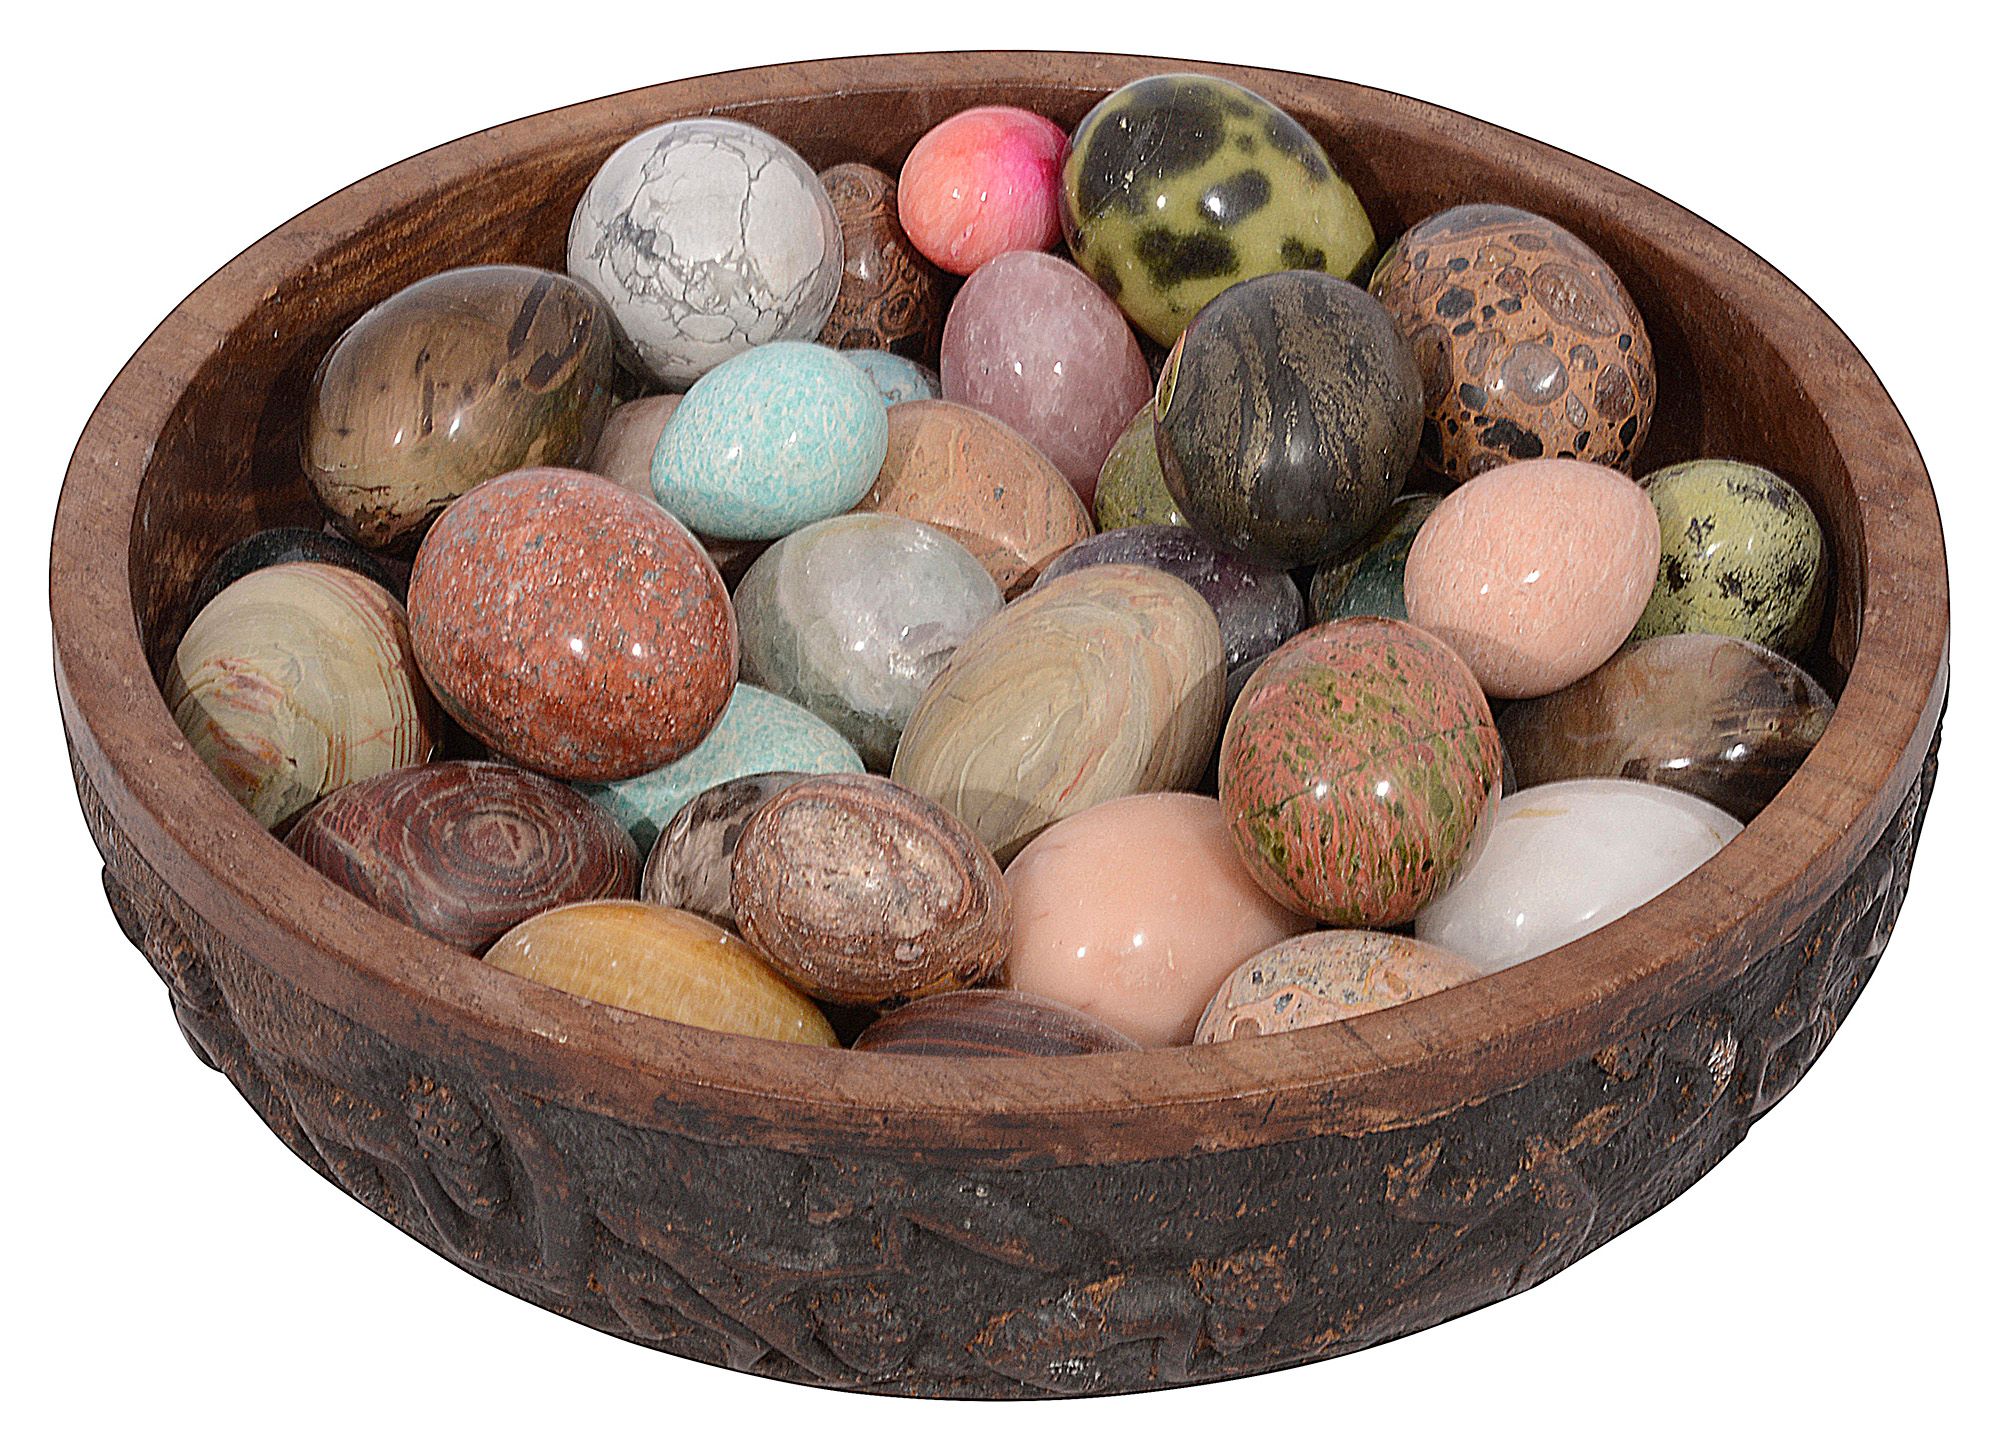 A collection of polished hardstone and mineral eggs